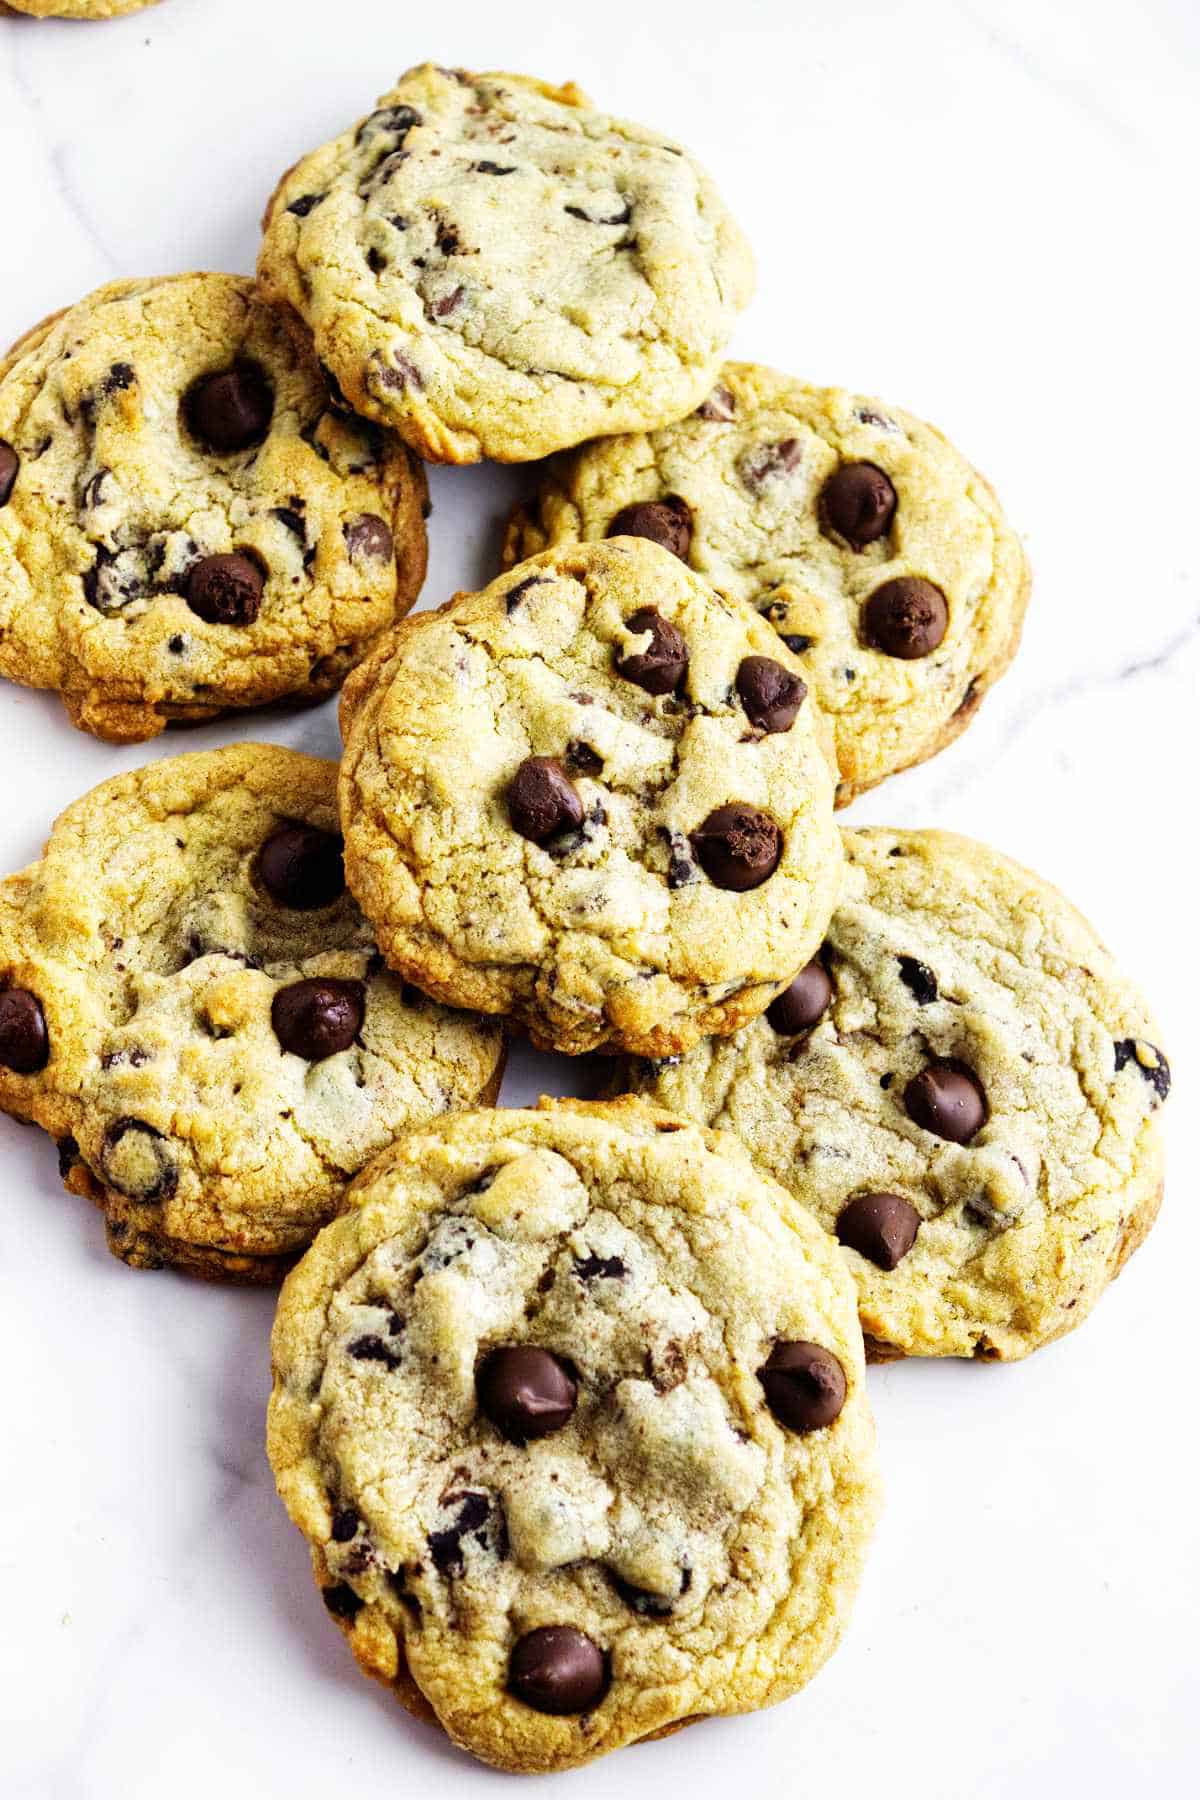 Bakery style chocolate chip cookies on a white marble background.